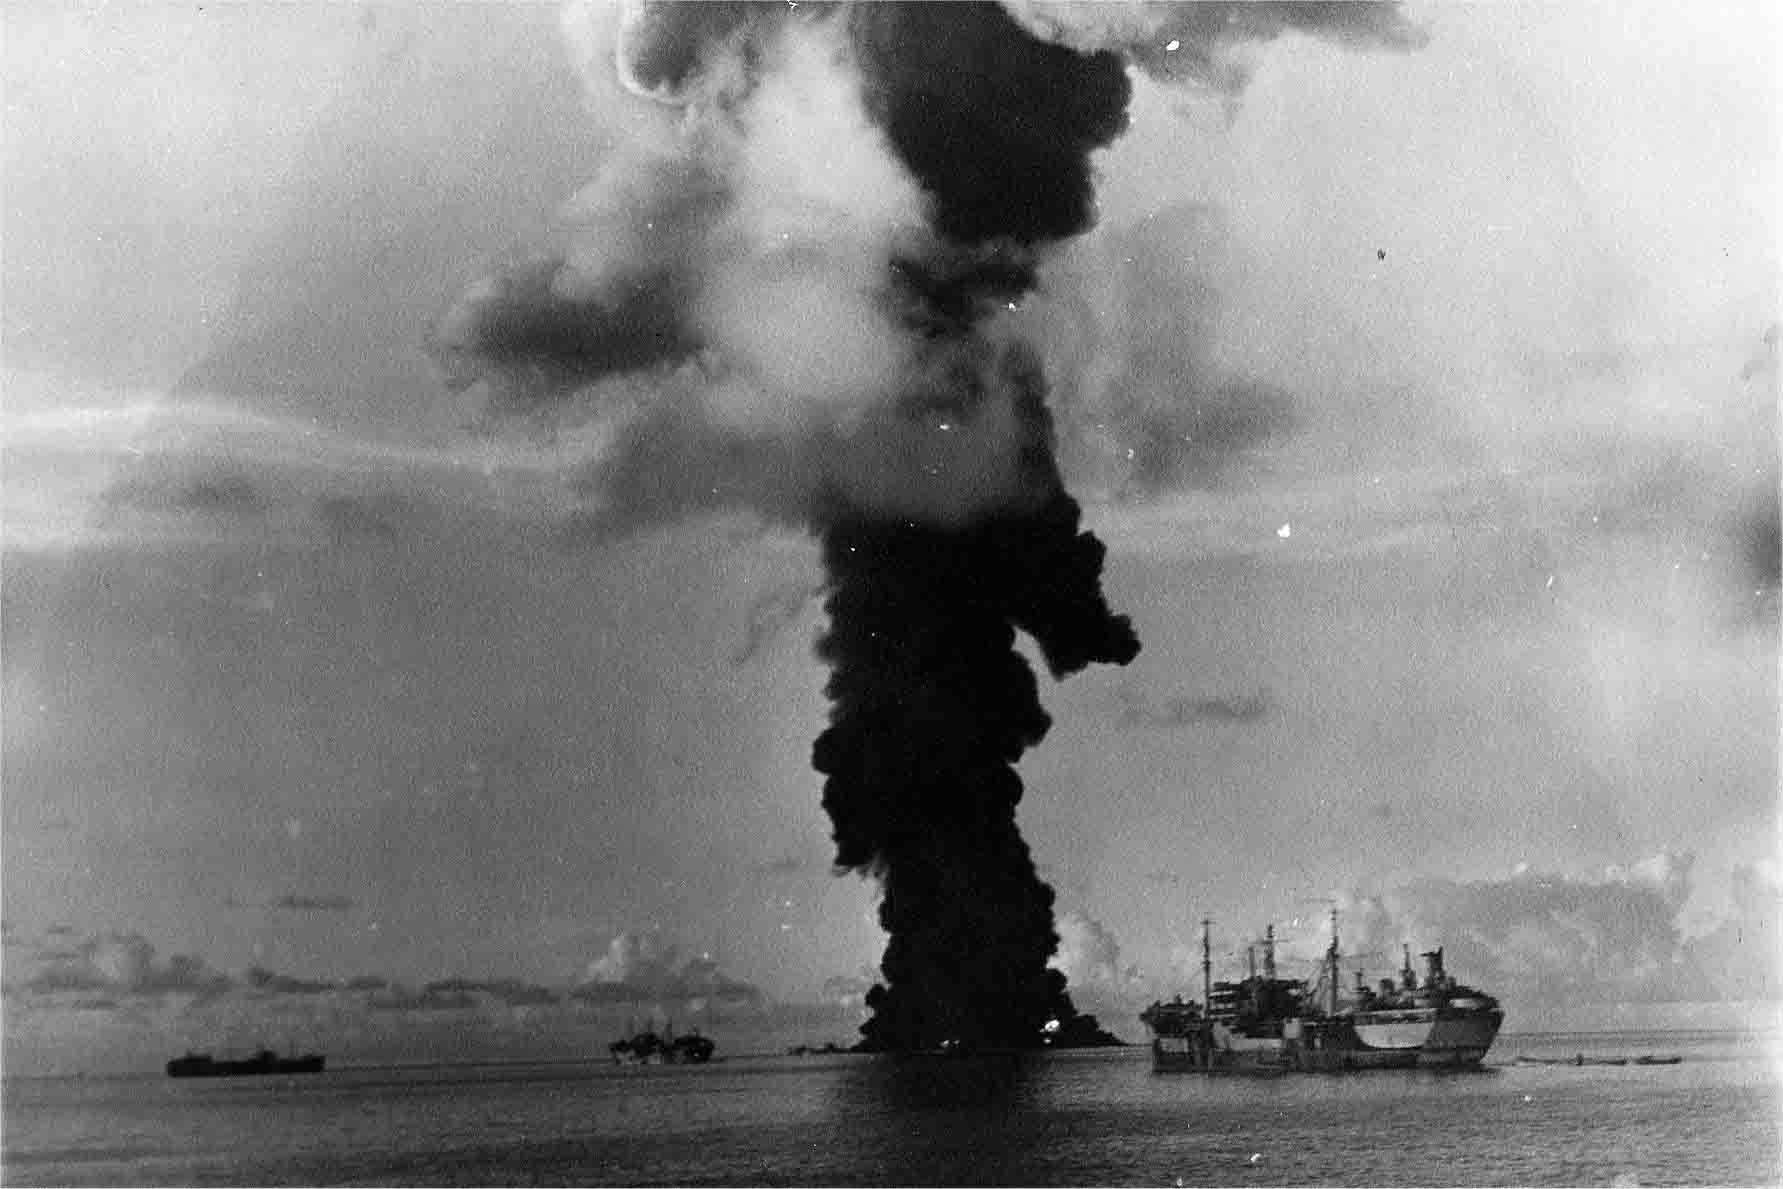 The fleet oiler USS Mississinewa burns furiously after a successful attack by Kaiten against the U.S. anchorage at Ulithi Atoll in November 1944.